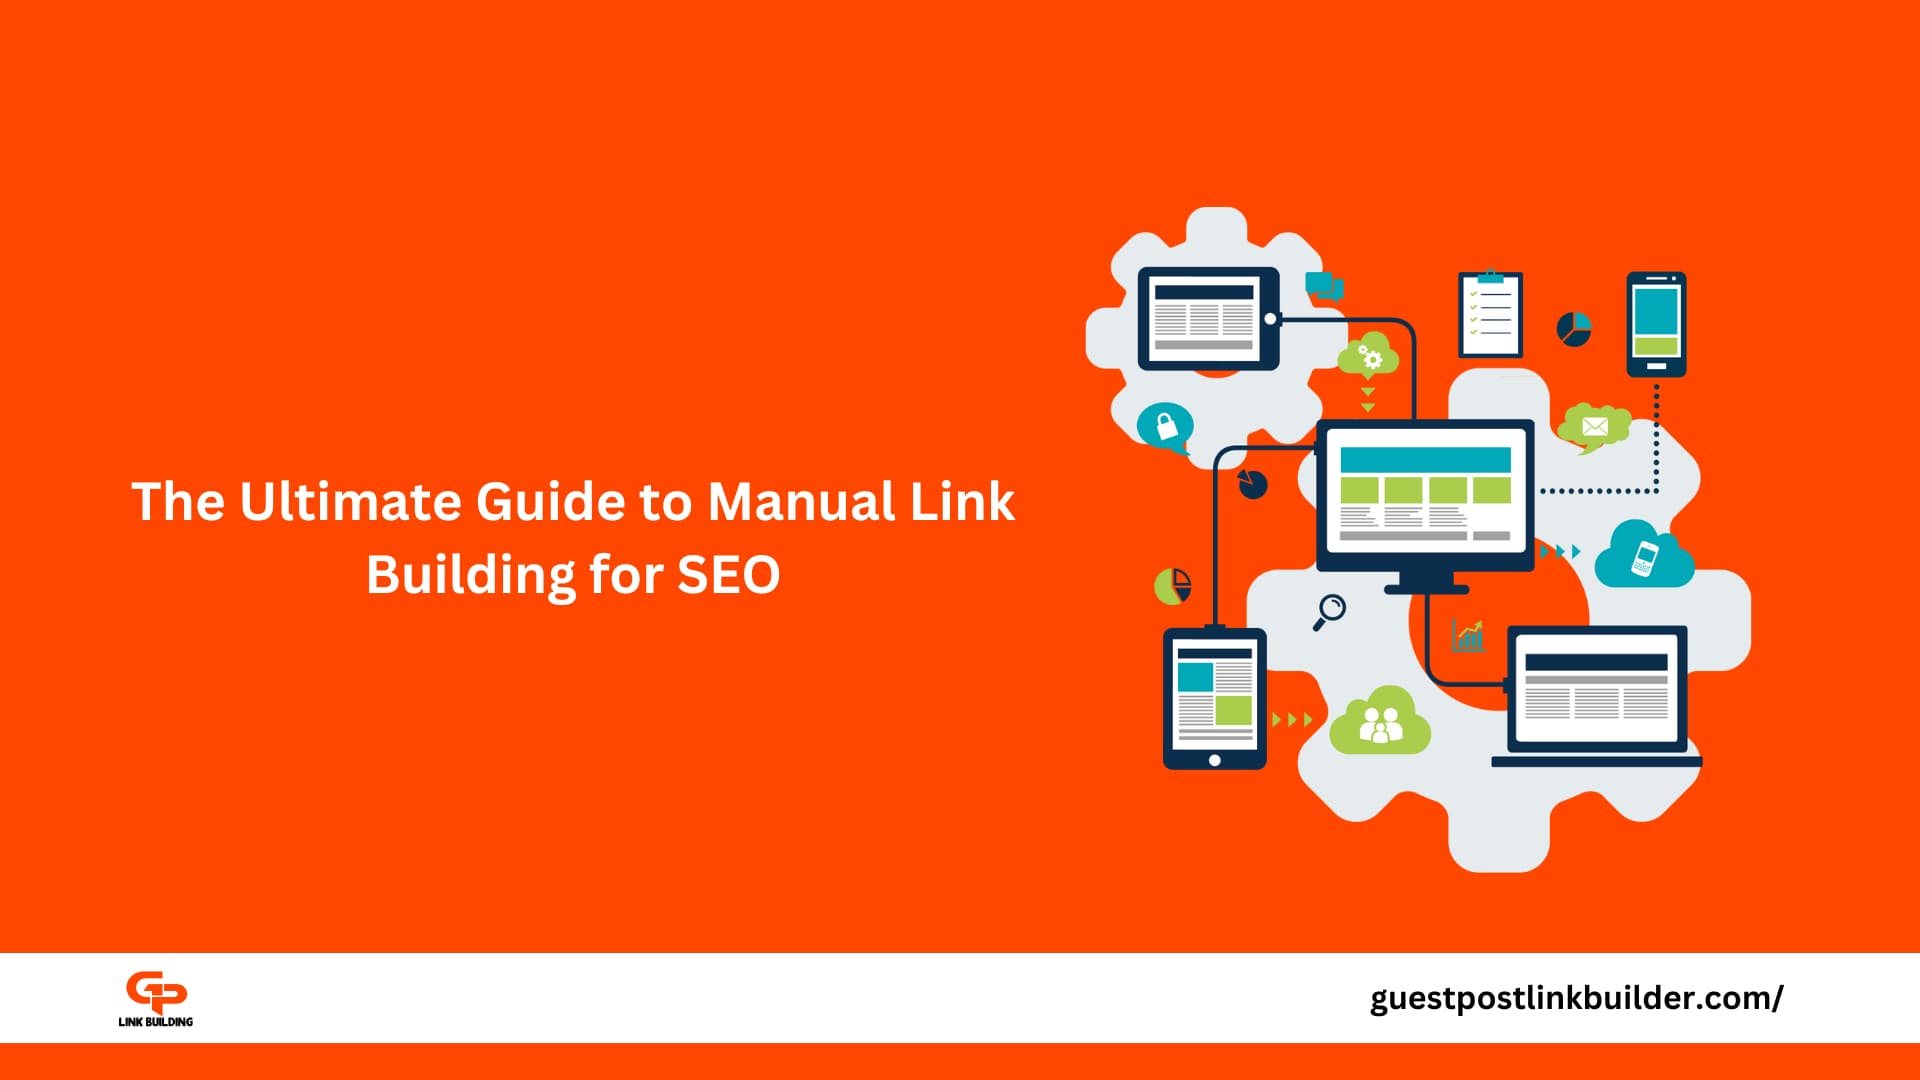 The Ultimate Guide to Manual Link Building for SEO